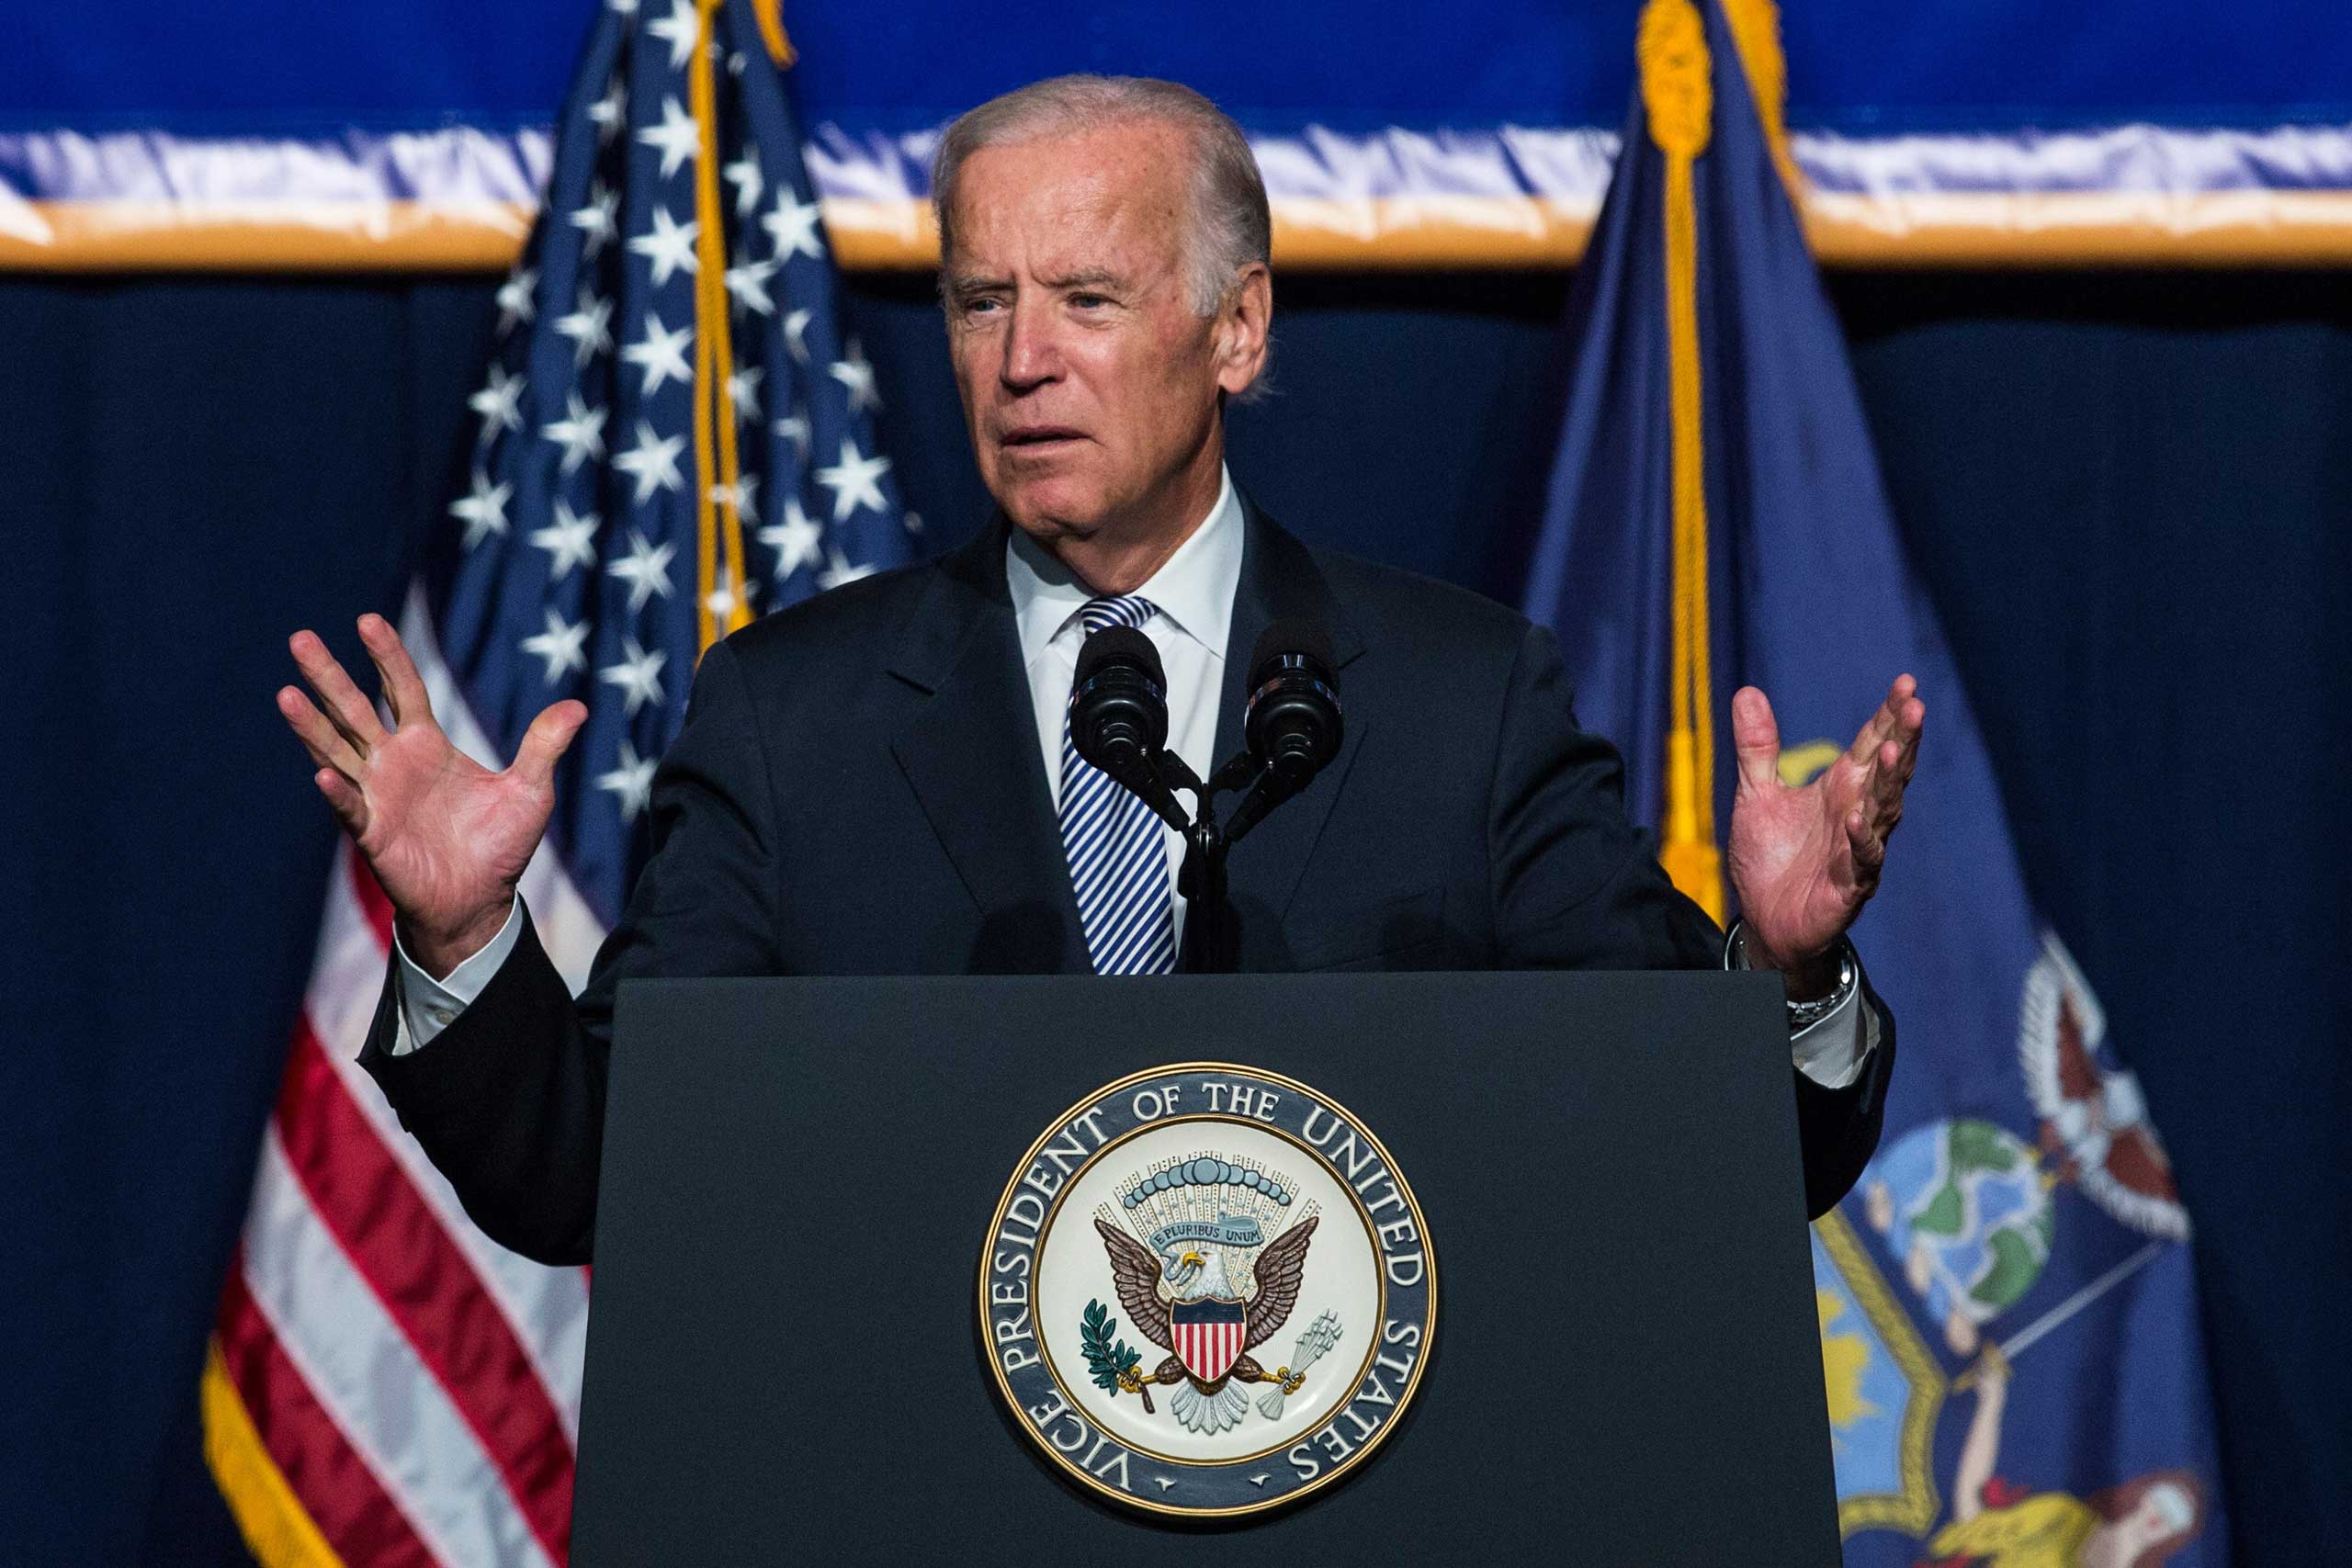 U.S. Vice President Joe Biden speaks in support of raising the minimum wage for the state of New York to $15 per hour in New York City, on Sept. 10, 2015 (Andrew Burton—Getty Images)